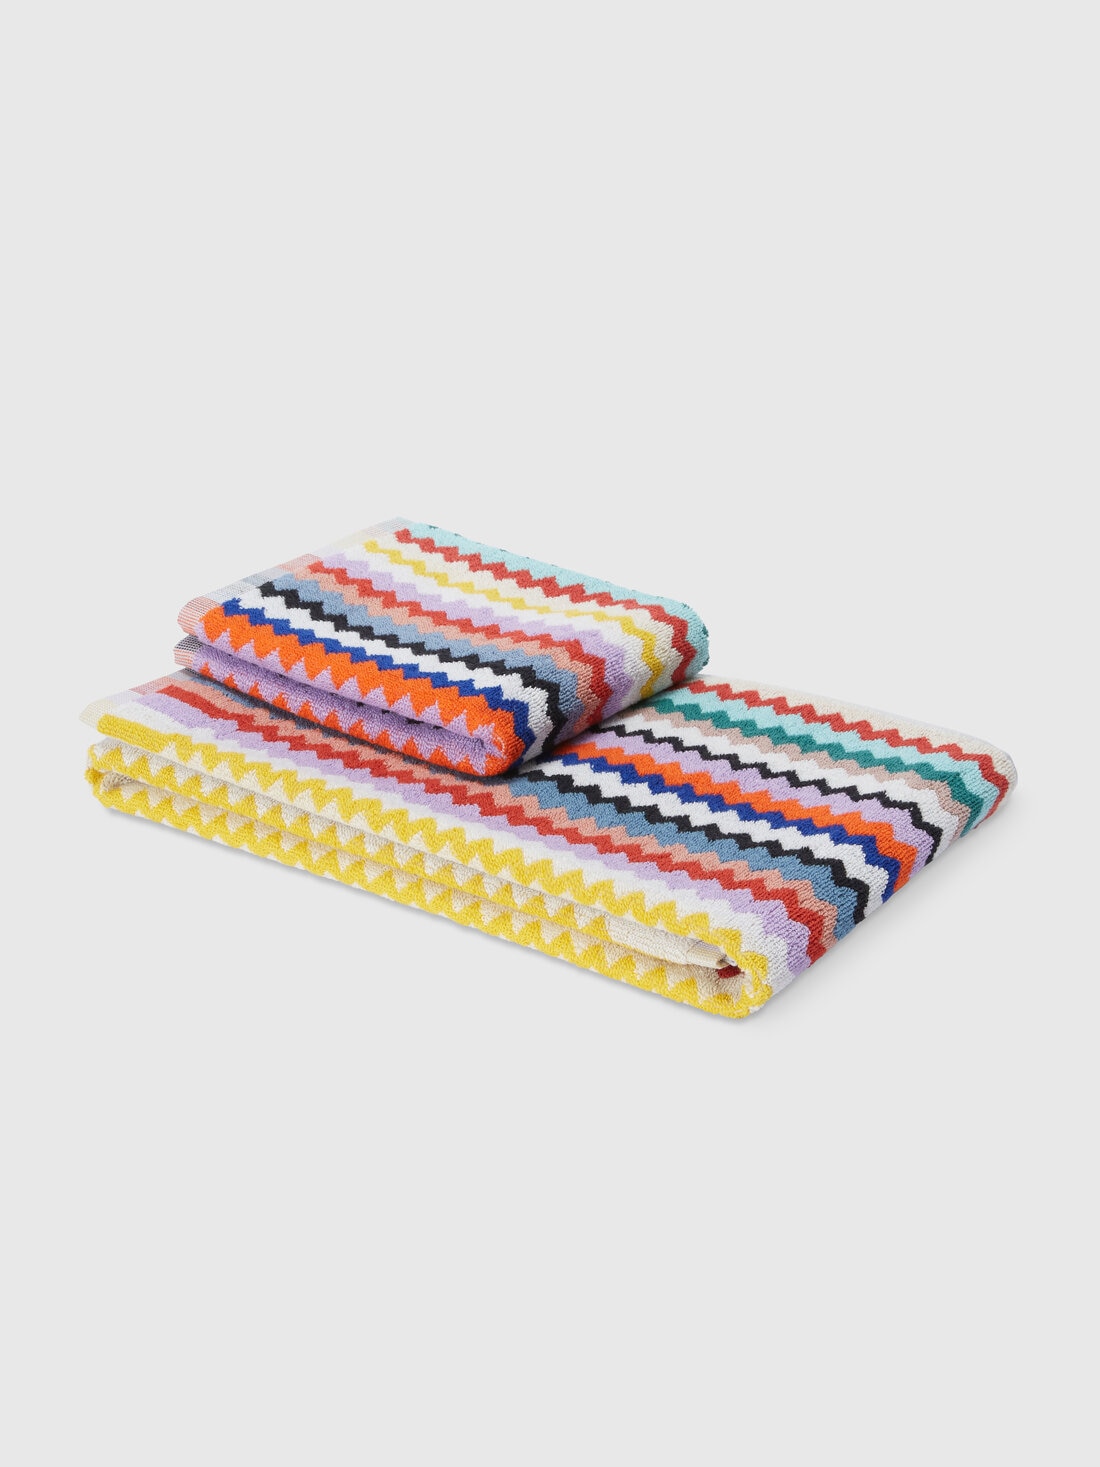 Riverbero 2-piece bath towel set in cotton terry with zigzag pattern, Multicoloured  - 8053147105260 - 0